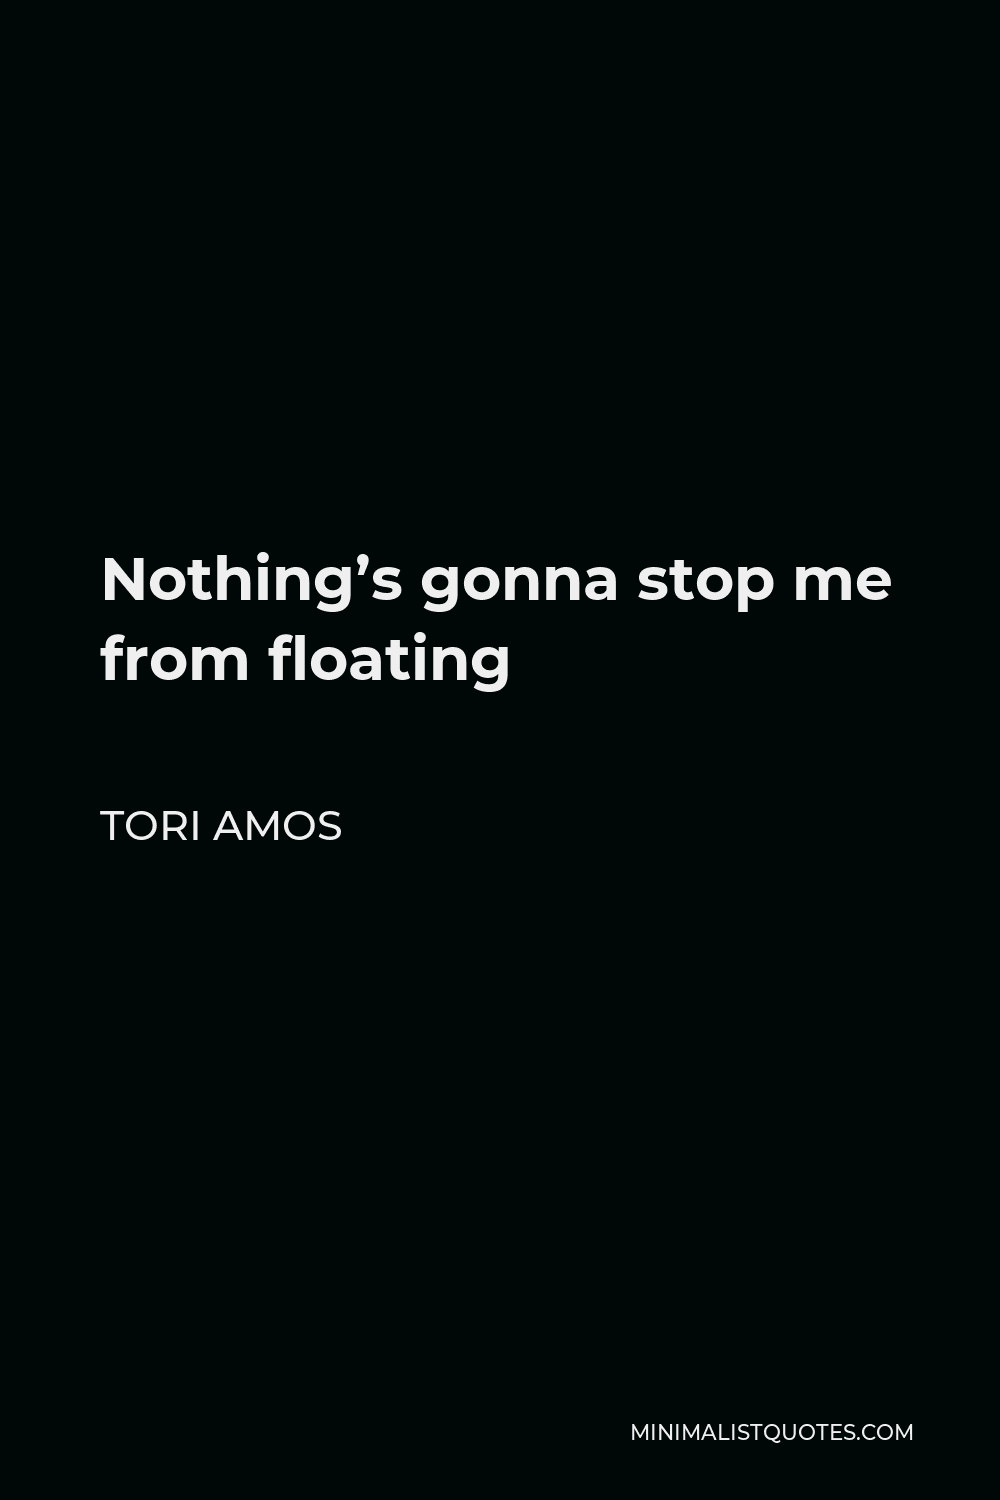 Tori Amos Quote - Nothing’s gonna stop me from floating